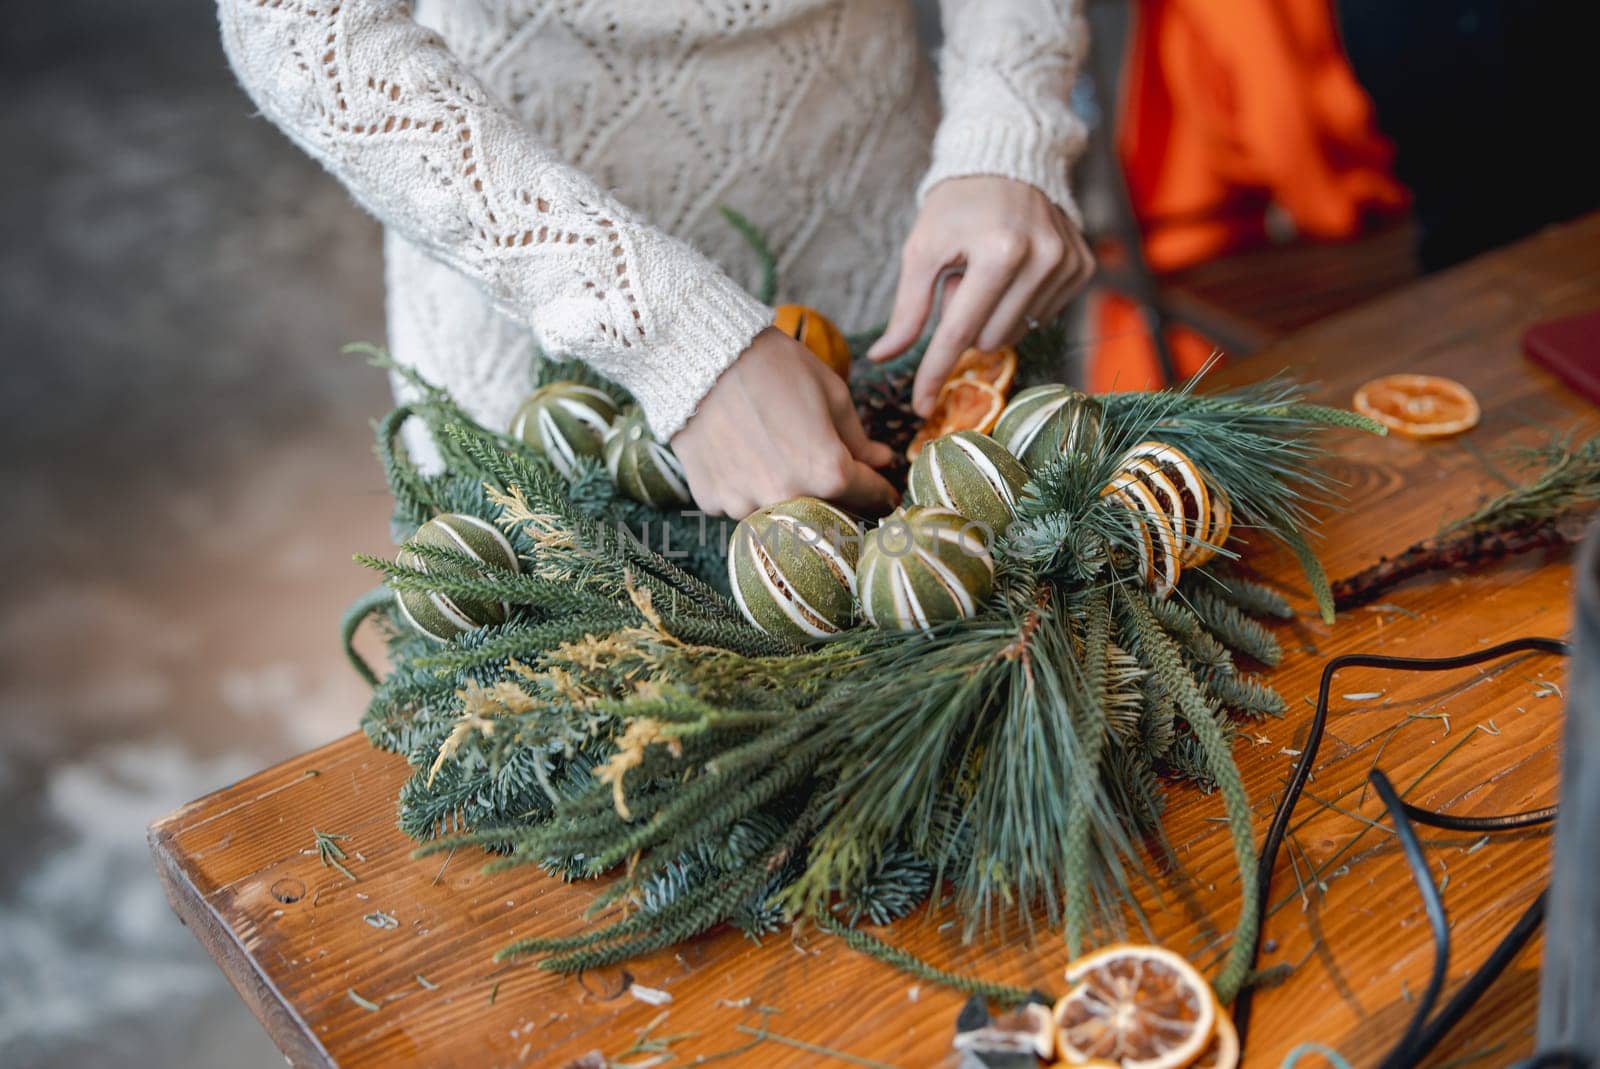 DIY masterclass covering the creation of Christmas wreaths and New Year's decorations. High quality photo